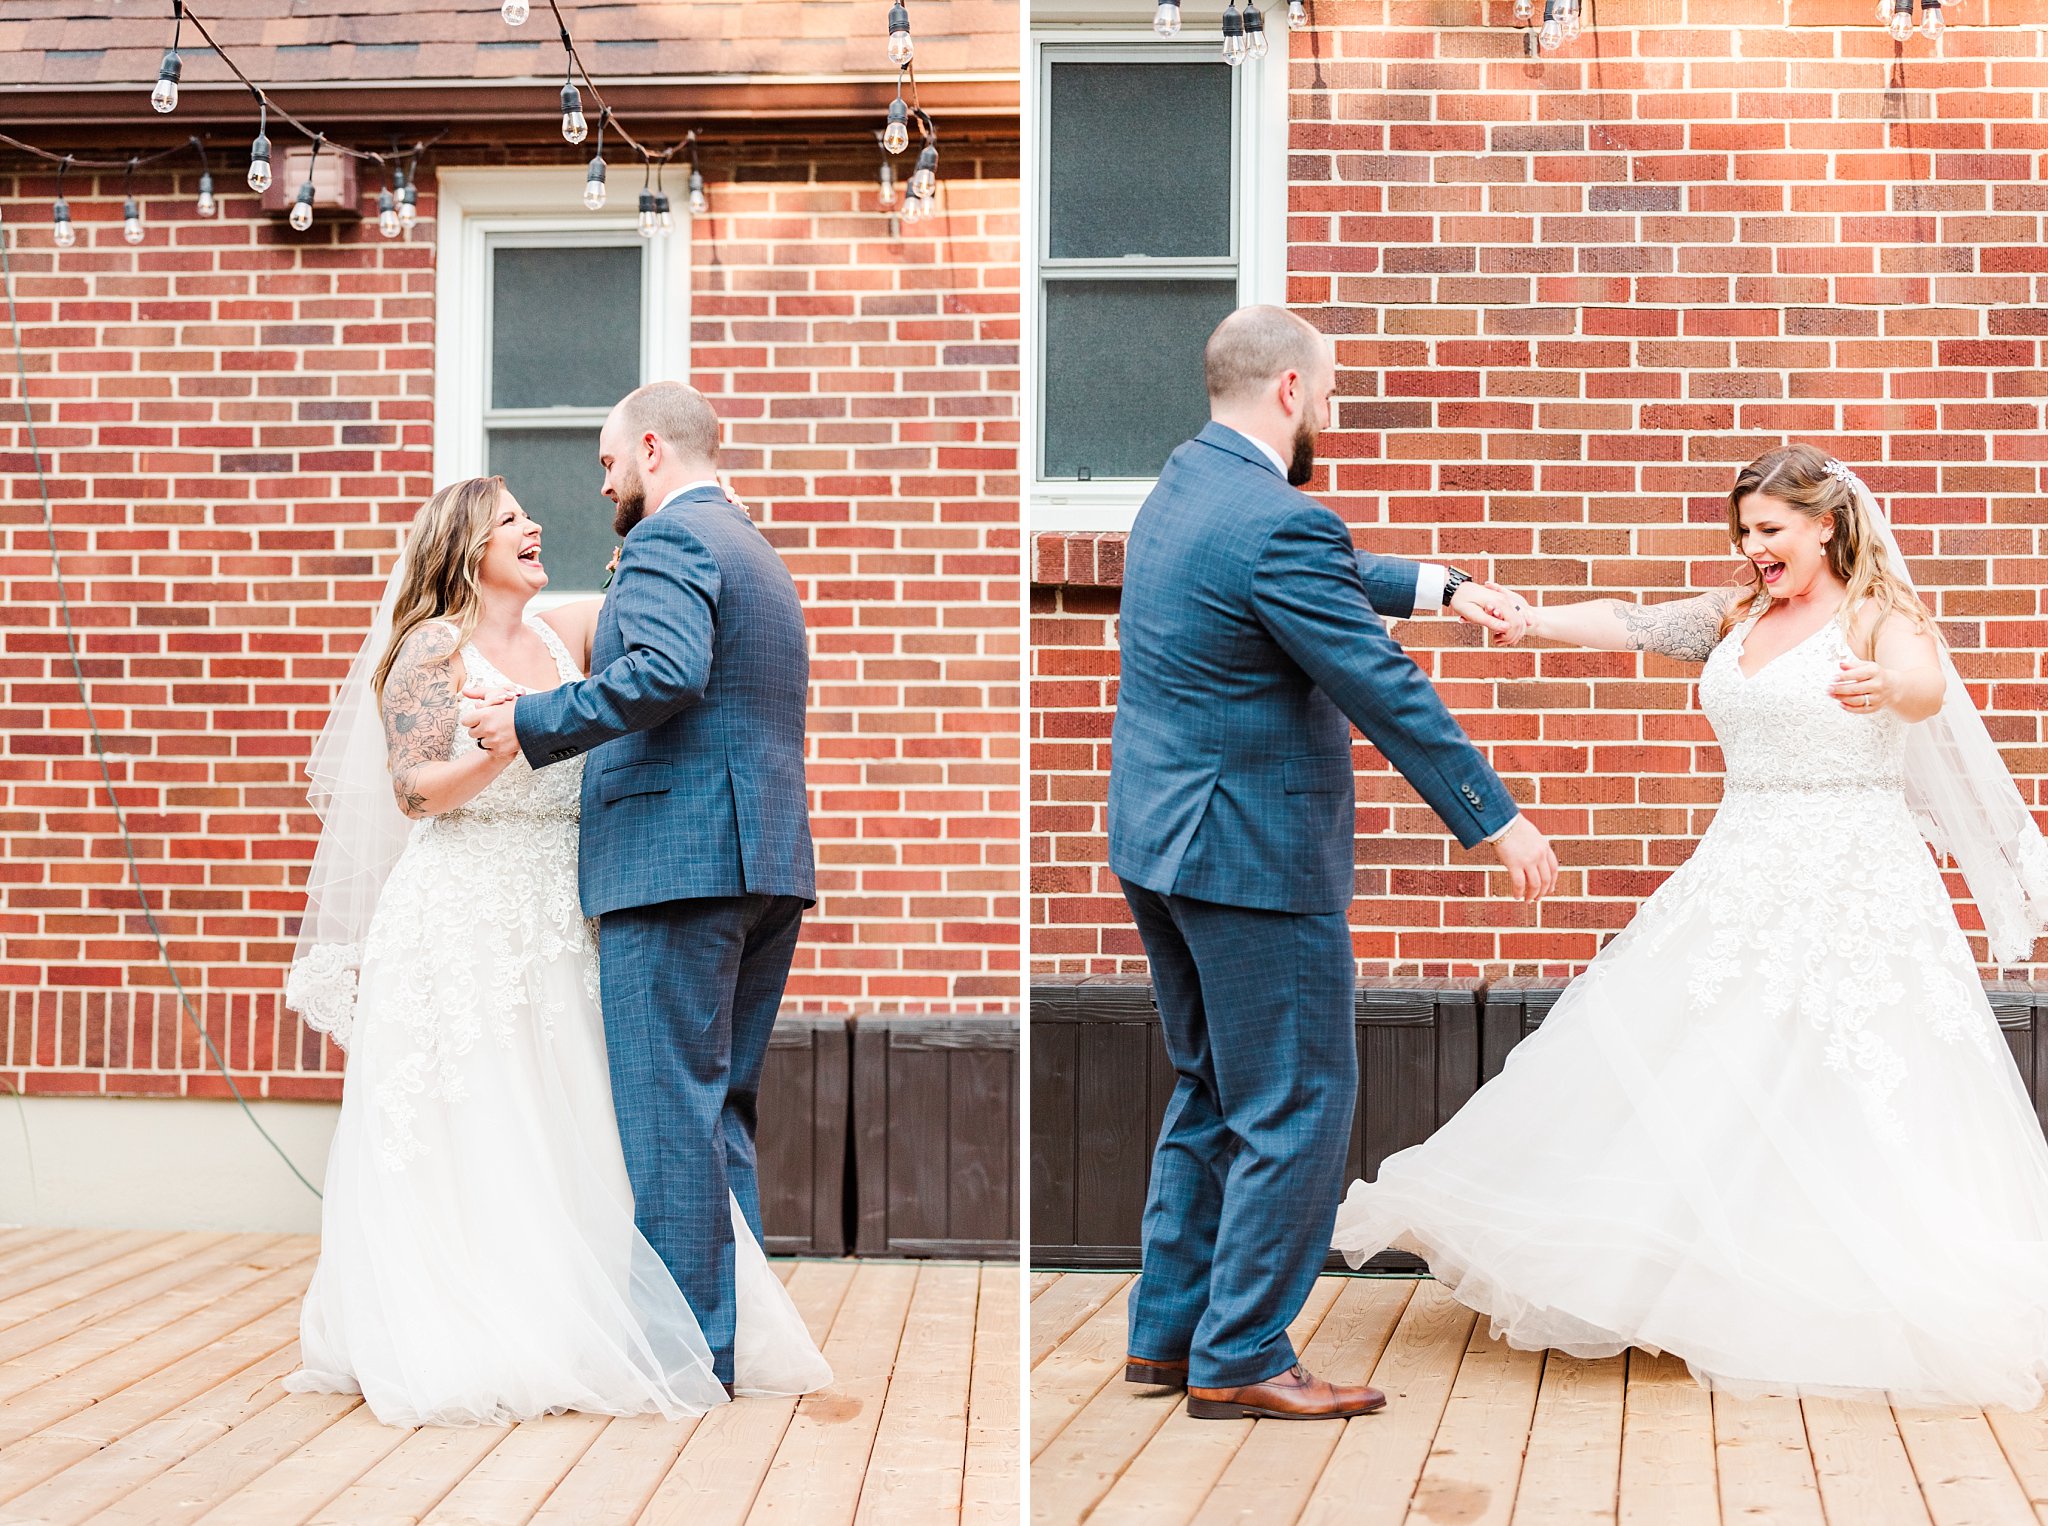 the bride and groom dance in front of a red brick wall